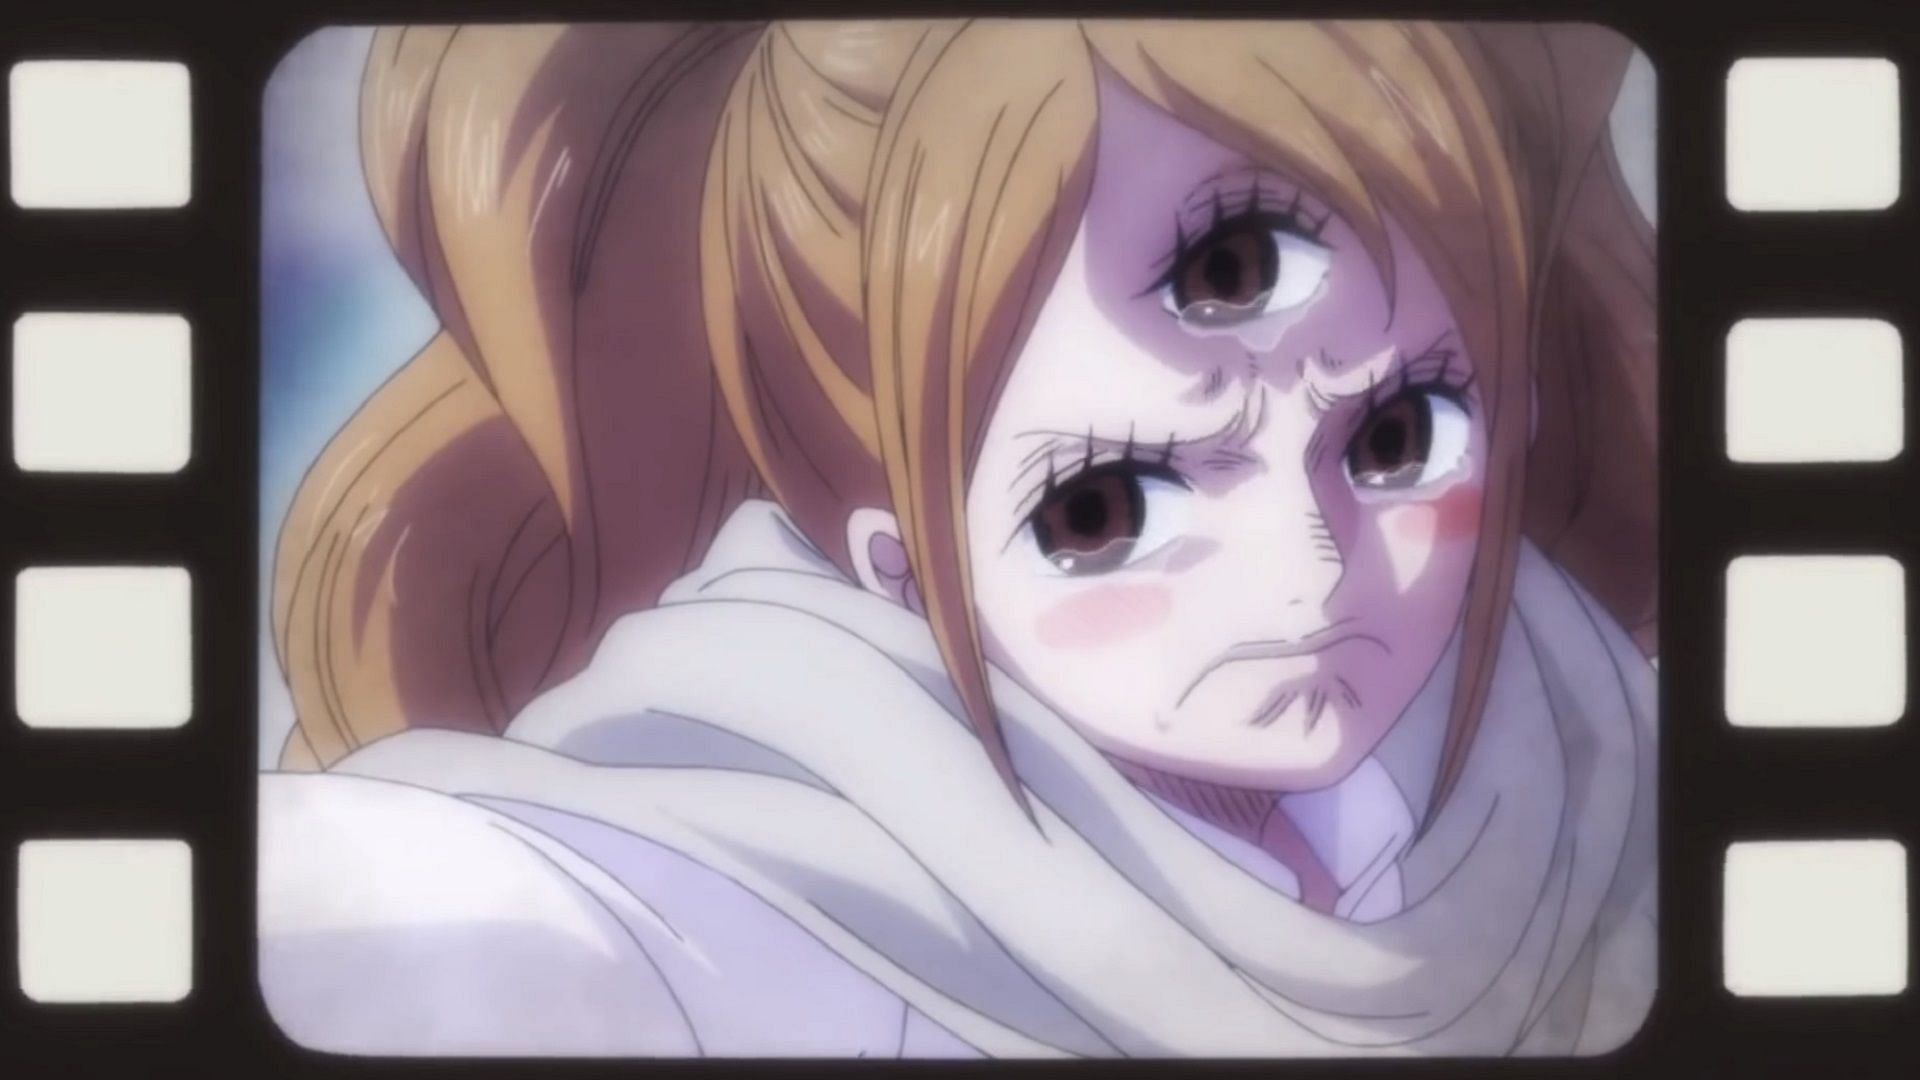 The Three-Eyed Charlotte Pudding as seen in One Piece (Image via Toei Animation)